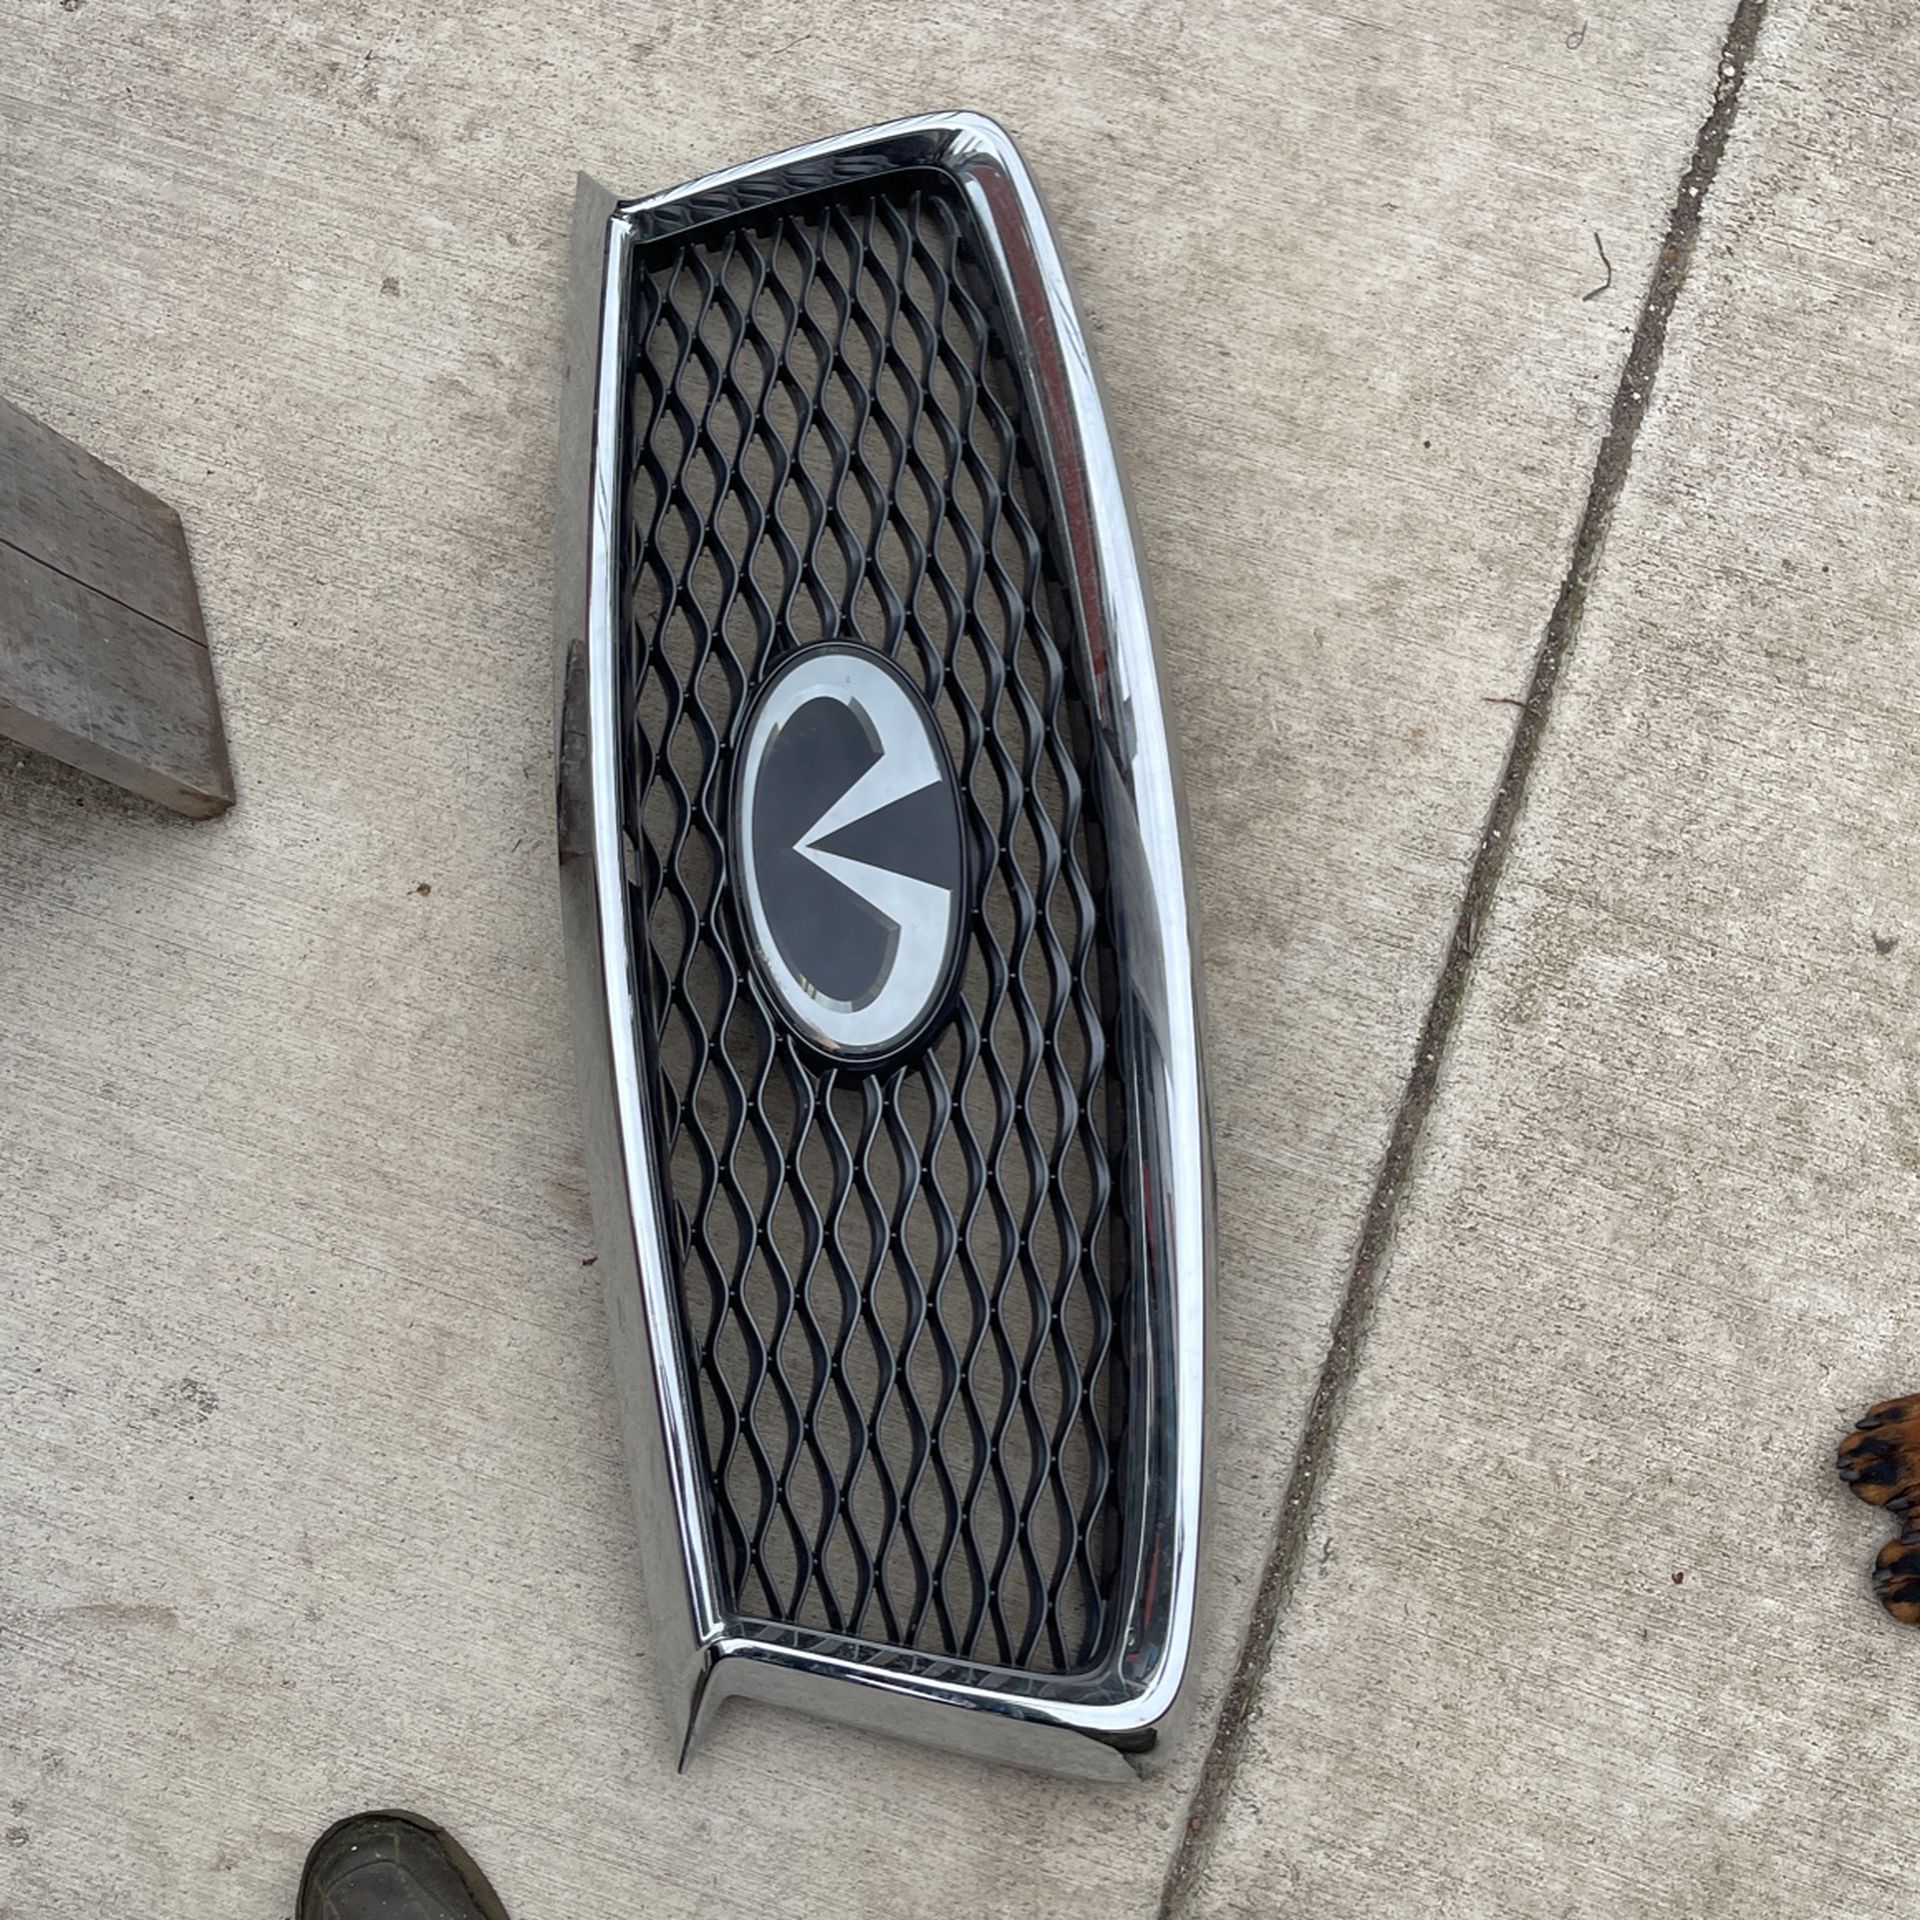 2016 Infinity Qx60 Front Grille